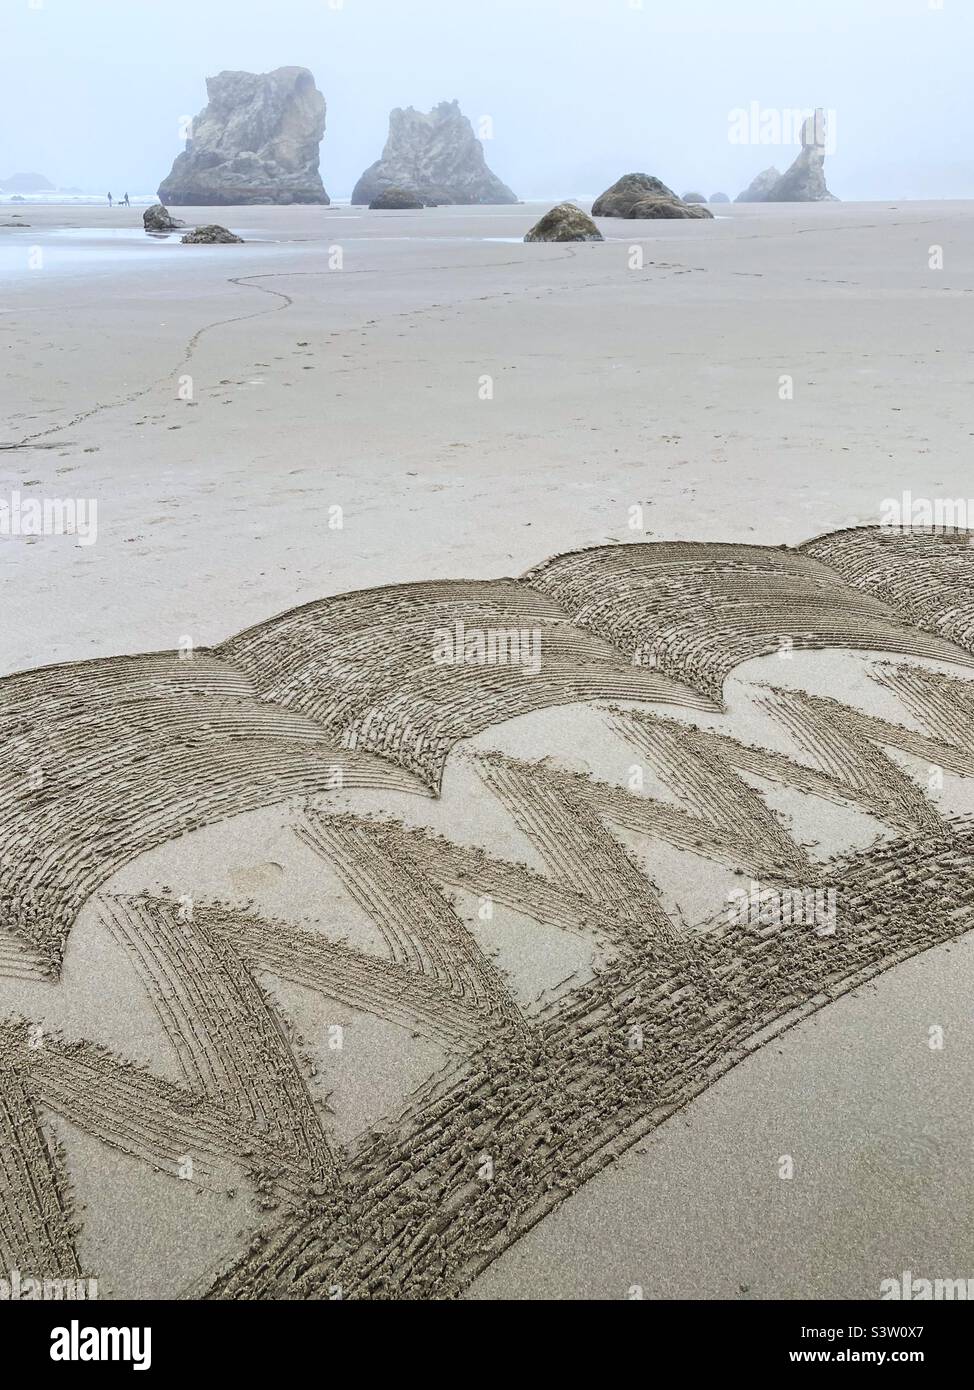 A section of a sand labyrinth on Face Rock beach in Bandon, Oregon. Stock Photo